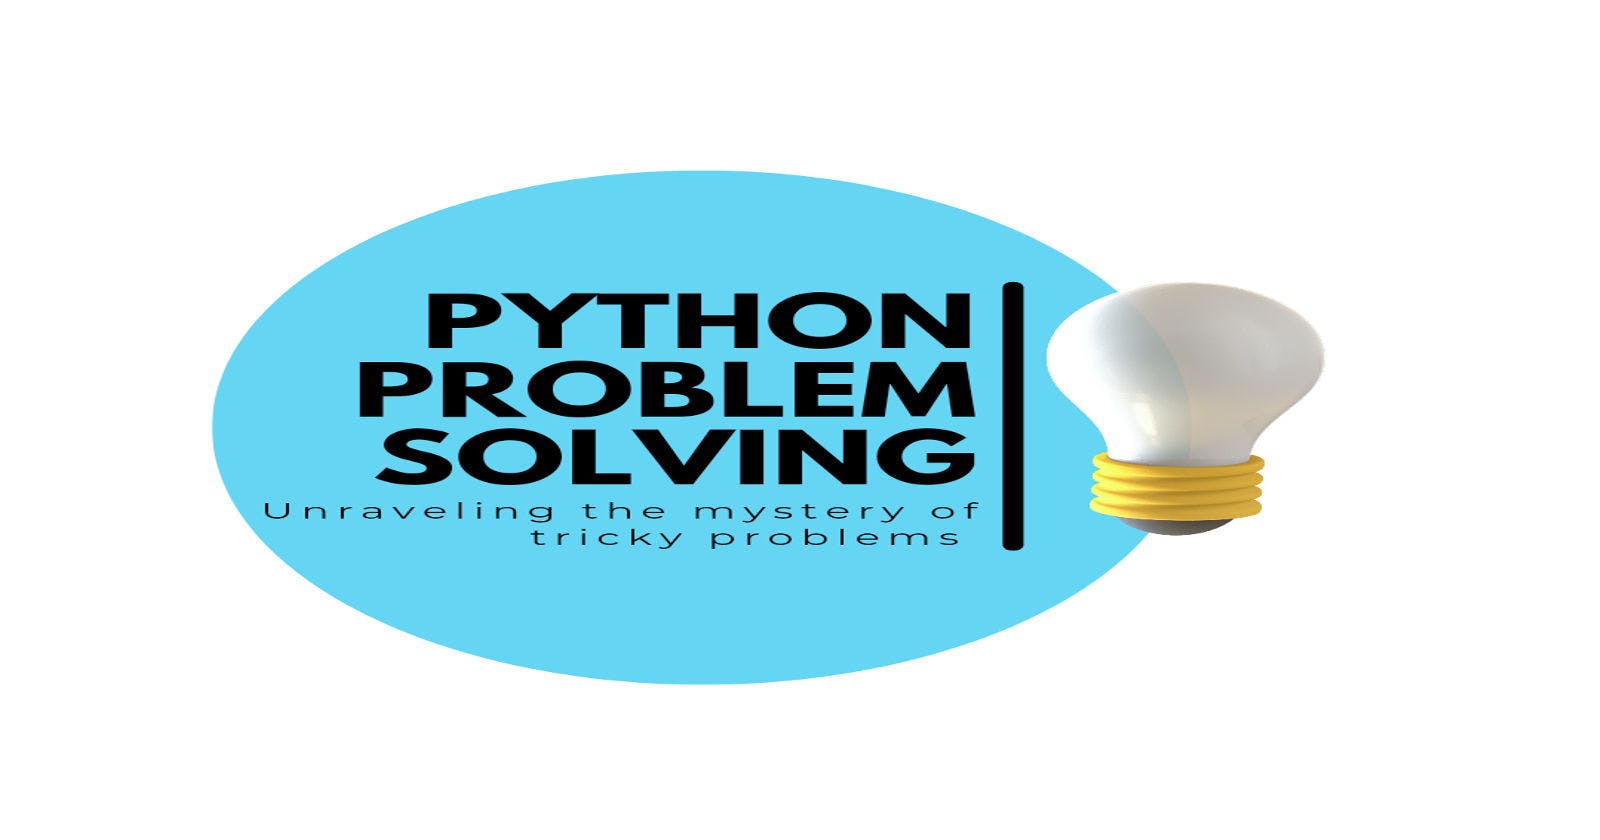 Python Problem Solving: Unraveling the Mystery of Tricky Problems